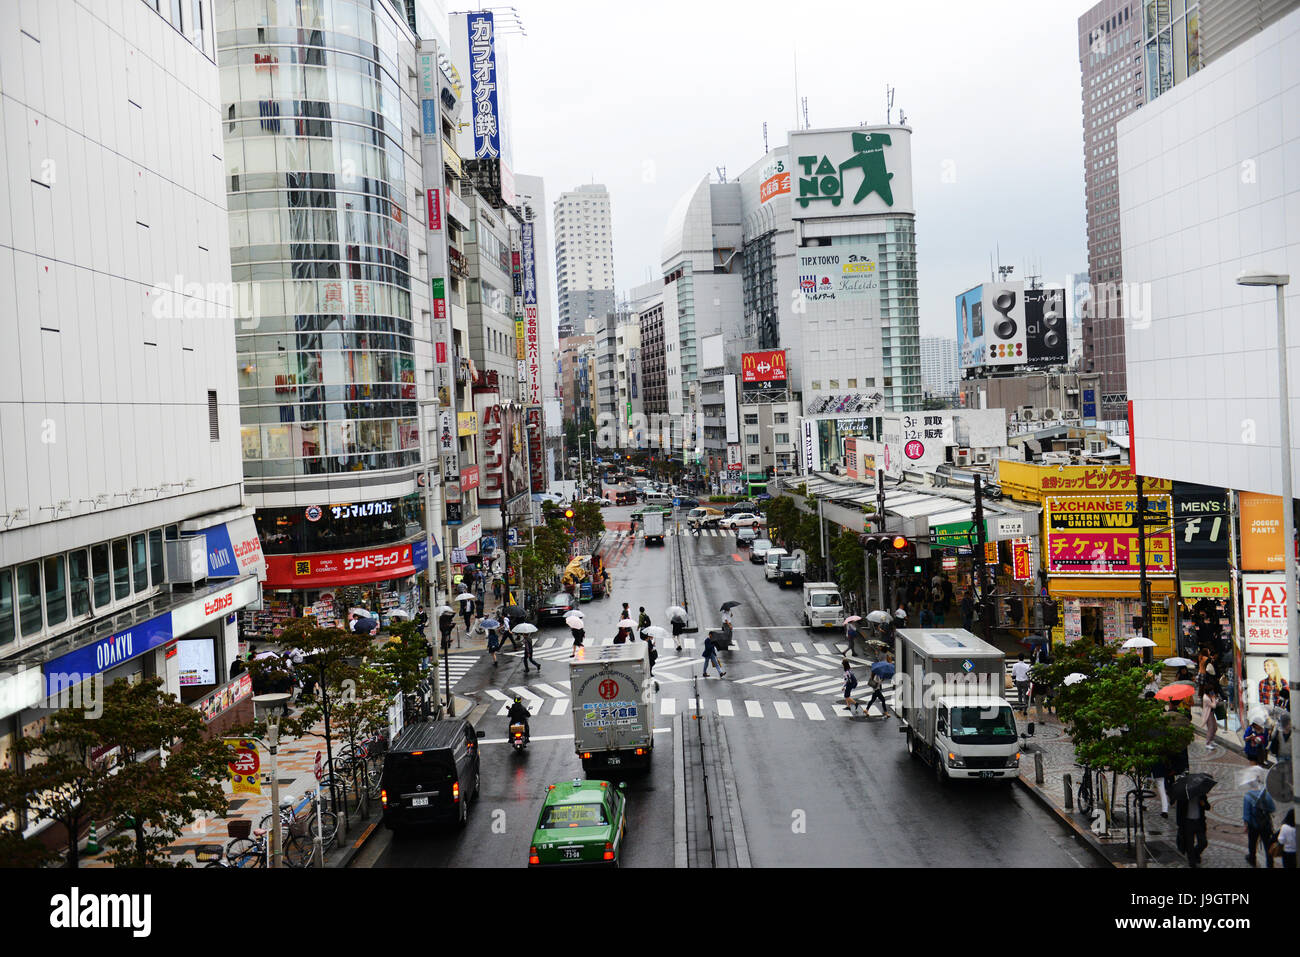 Shinjuku, Tokyo is one of the busiest districts in the city. Stock Photo